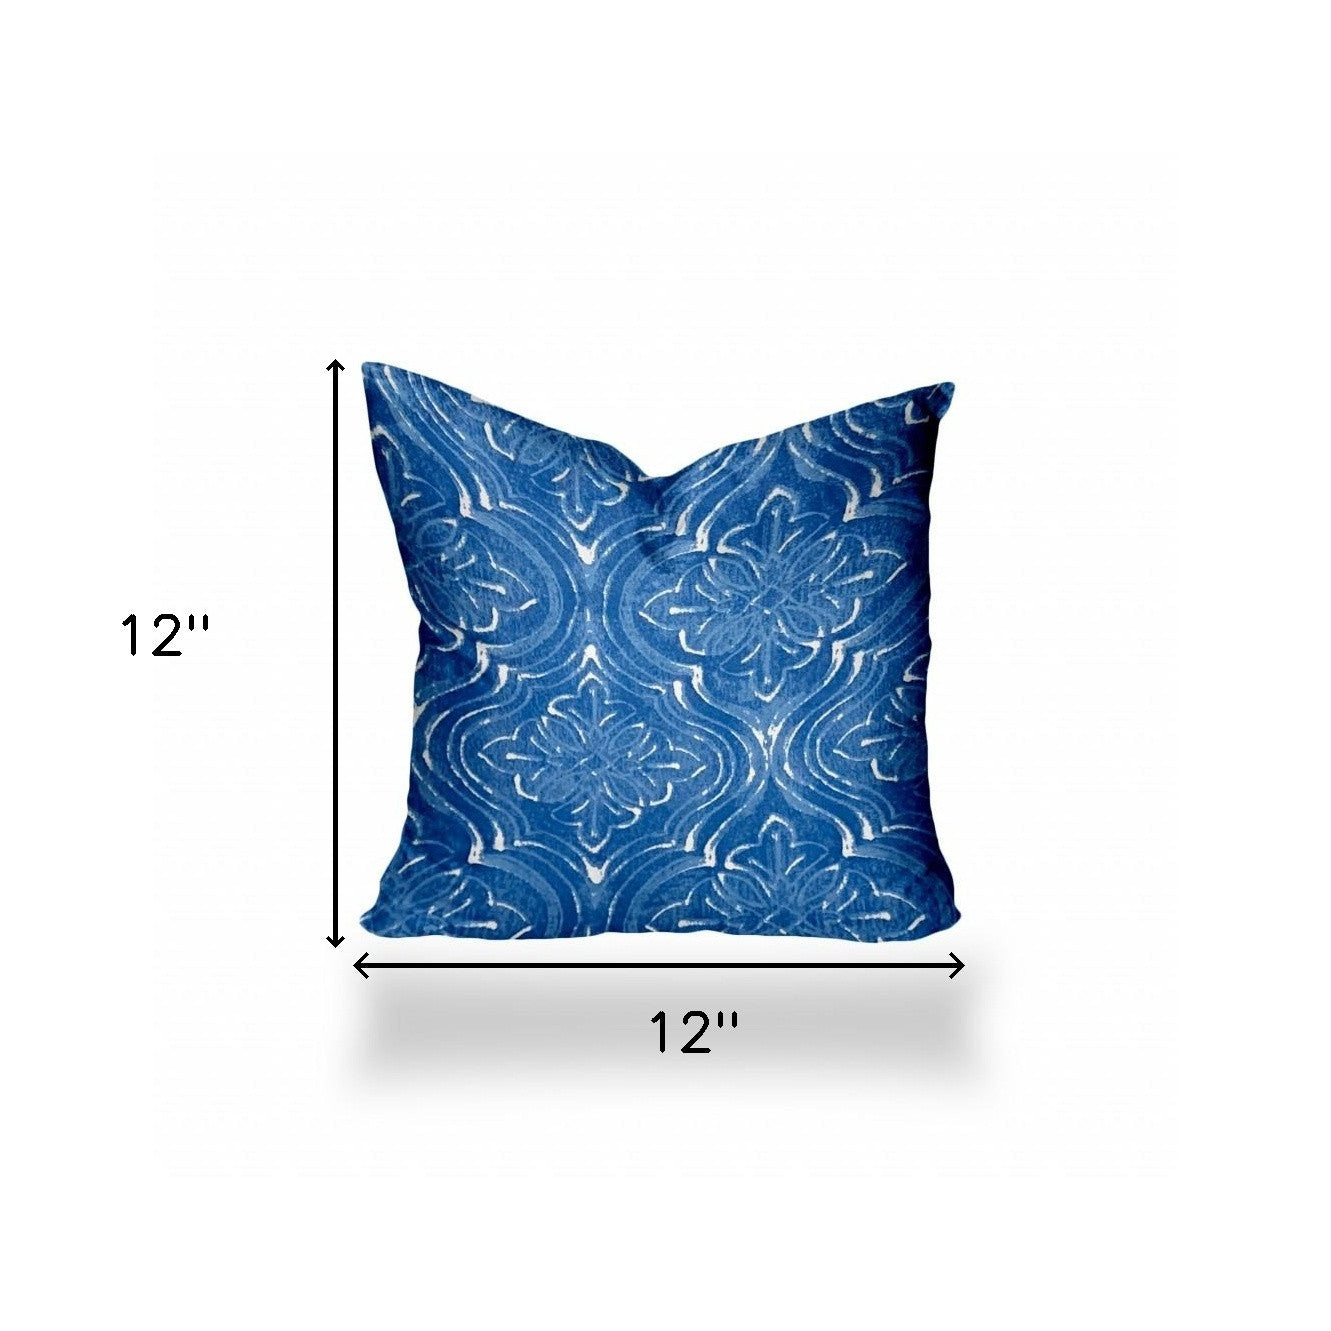 12" X 12" Blue And White Enveloped Ikat Throw Indoor Outdoor Pillow